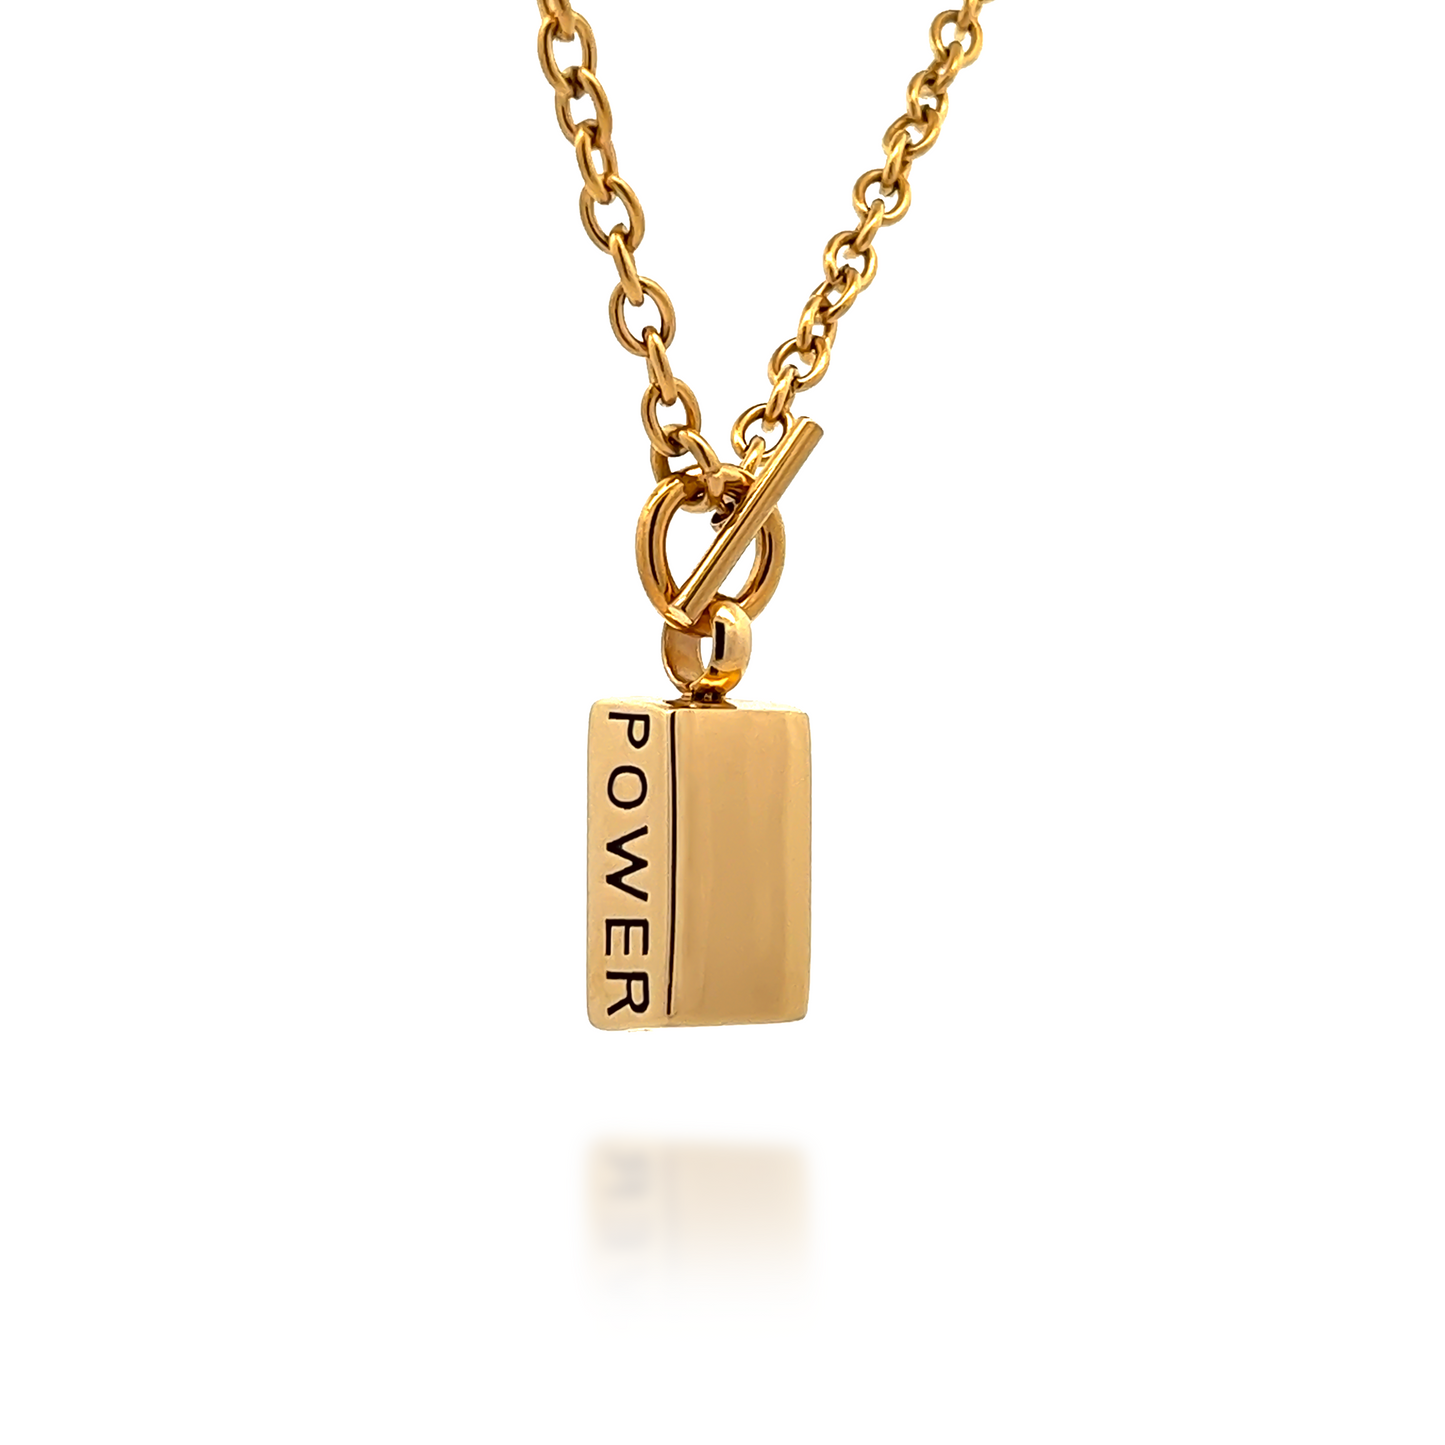 Power Bar Necklace